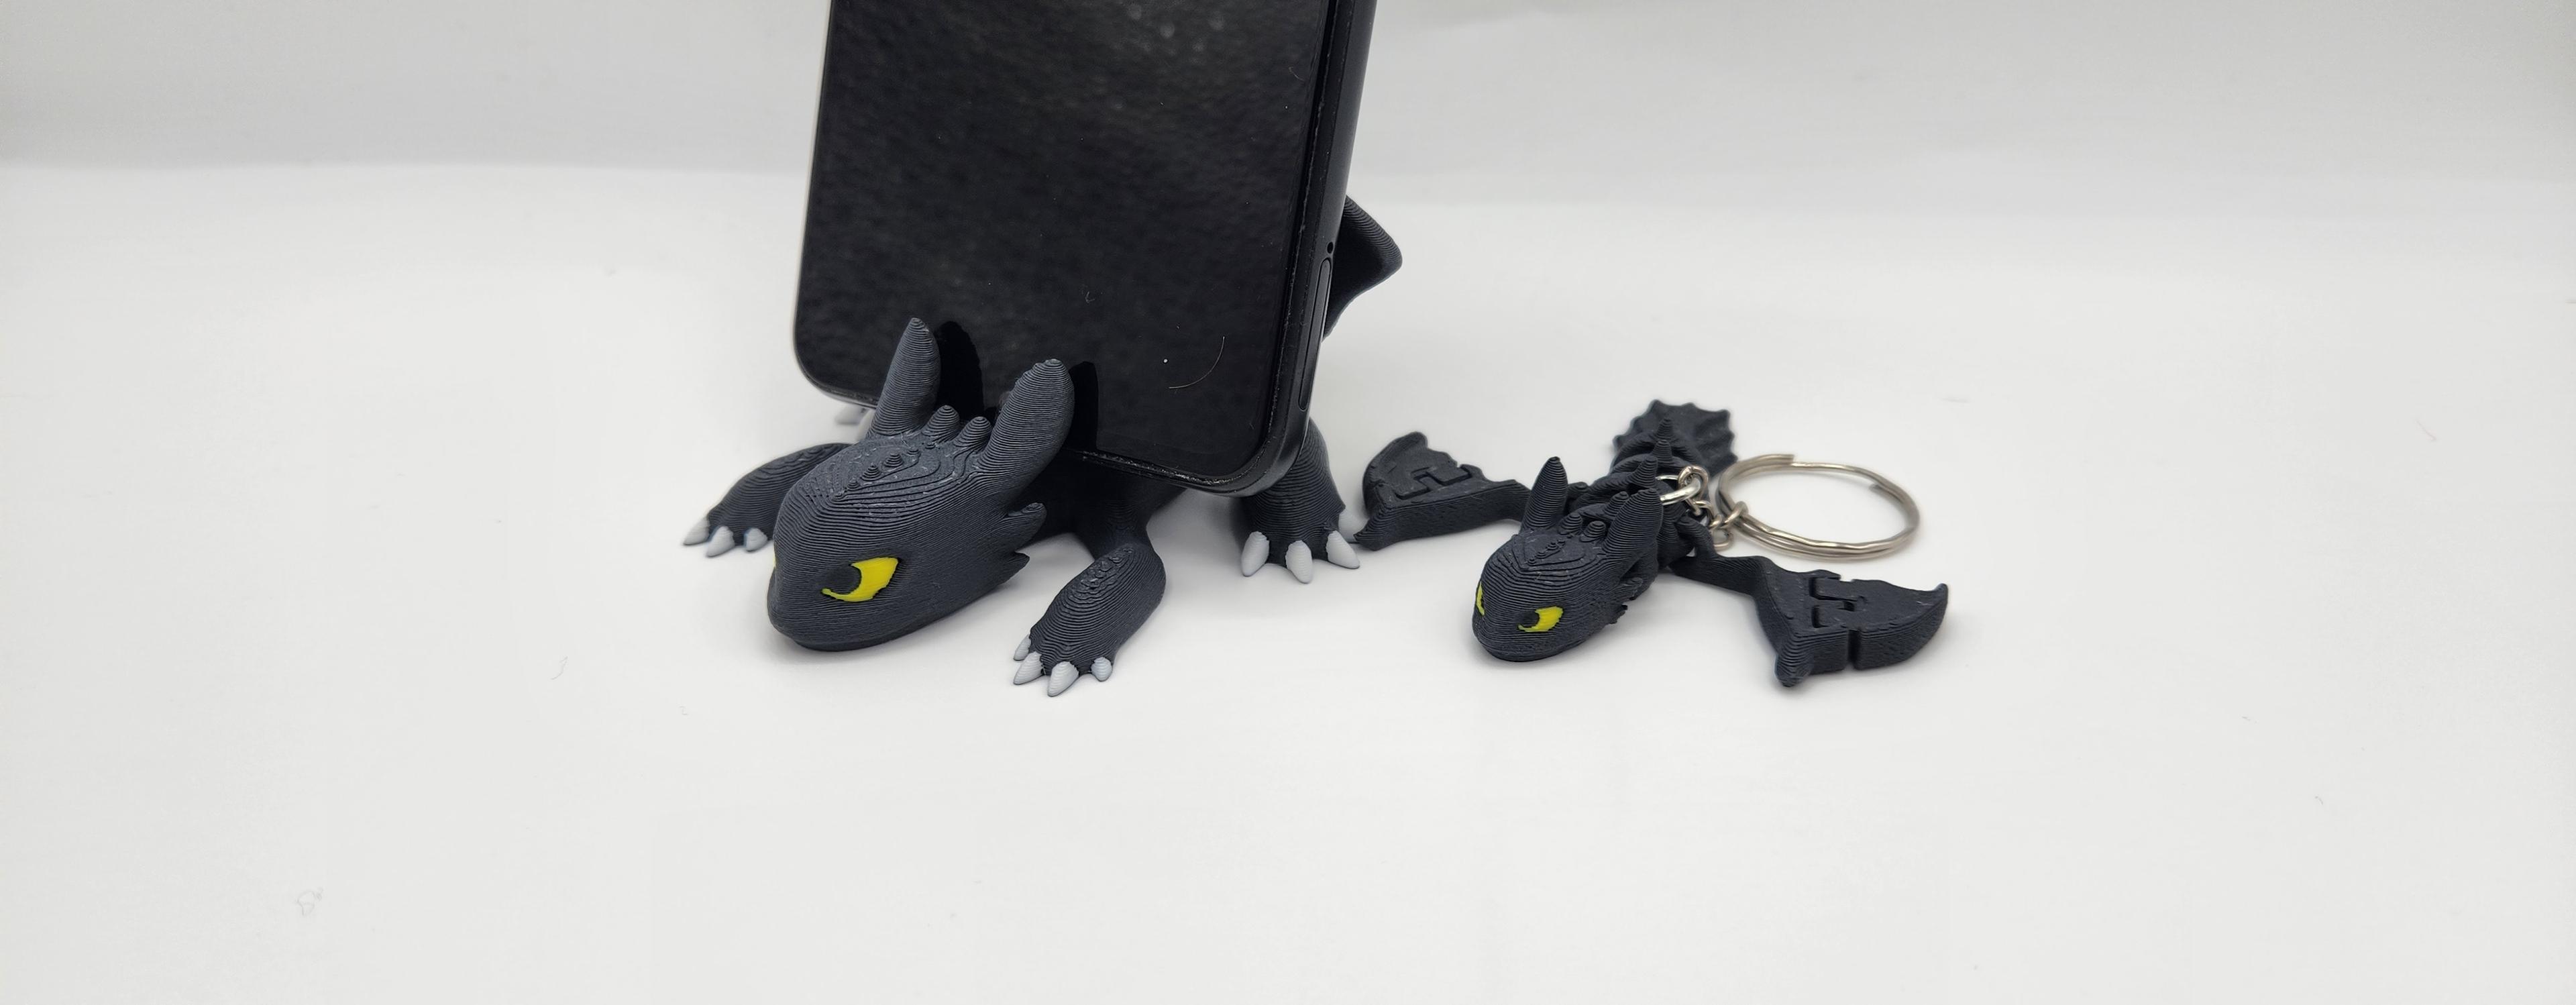 TOOTHLESS PHONE STAND 3d model